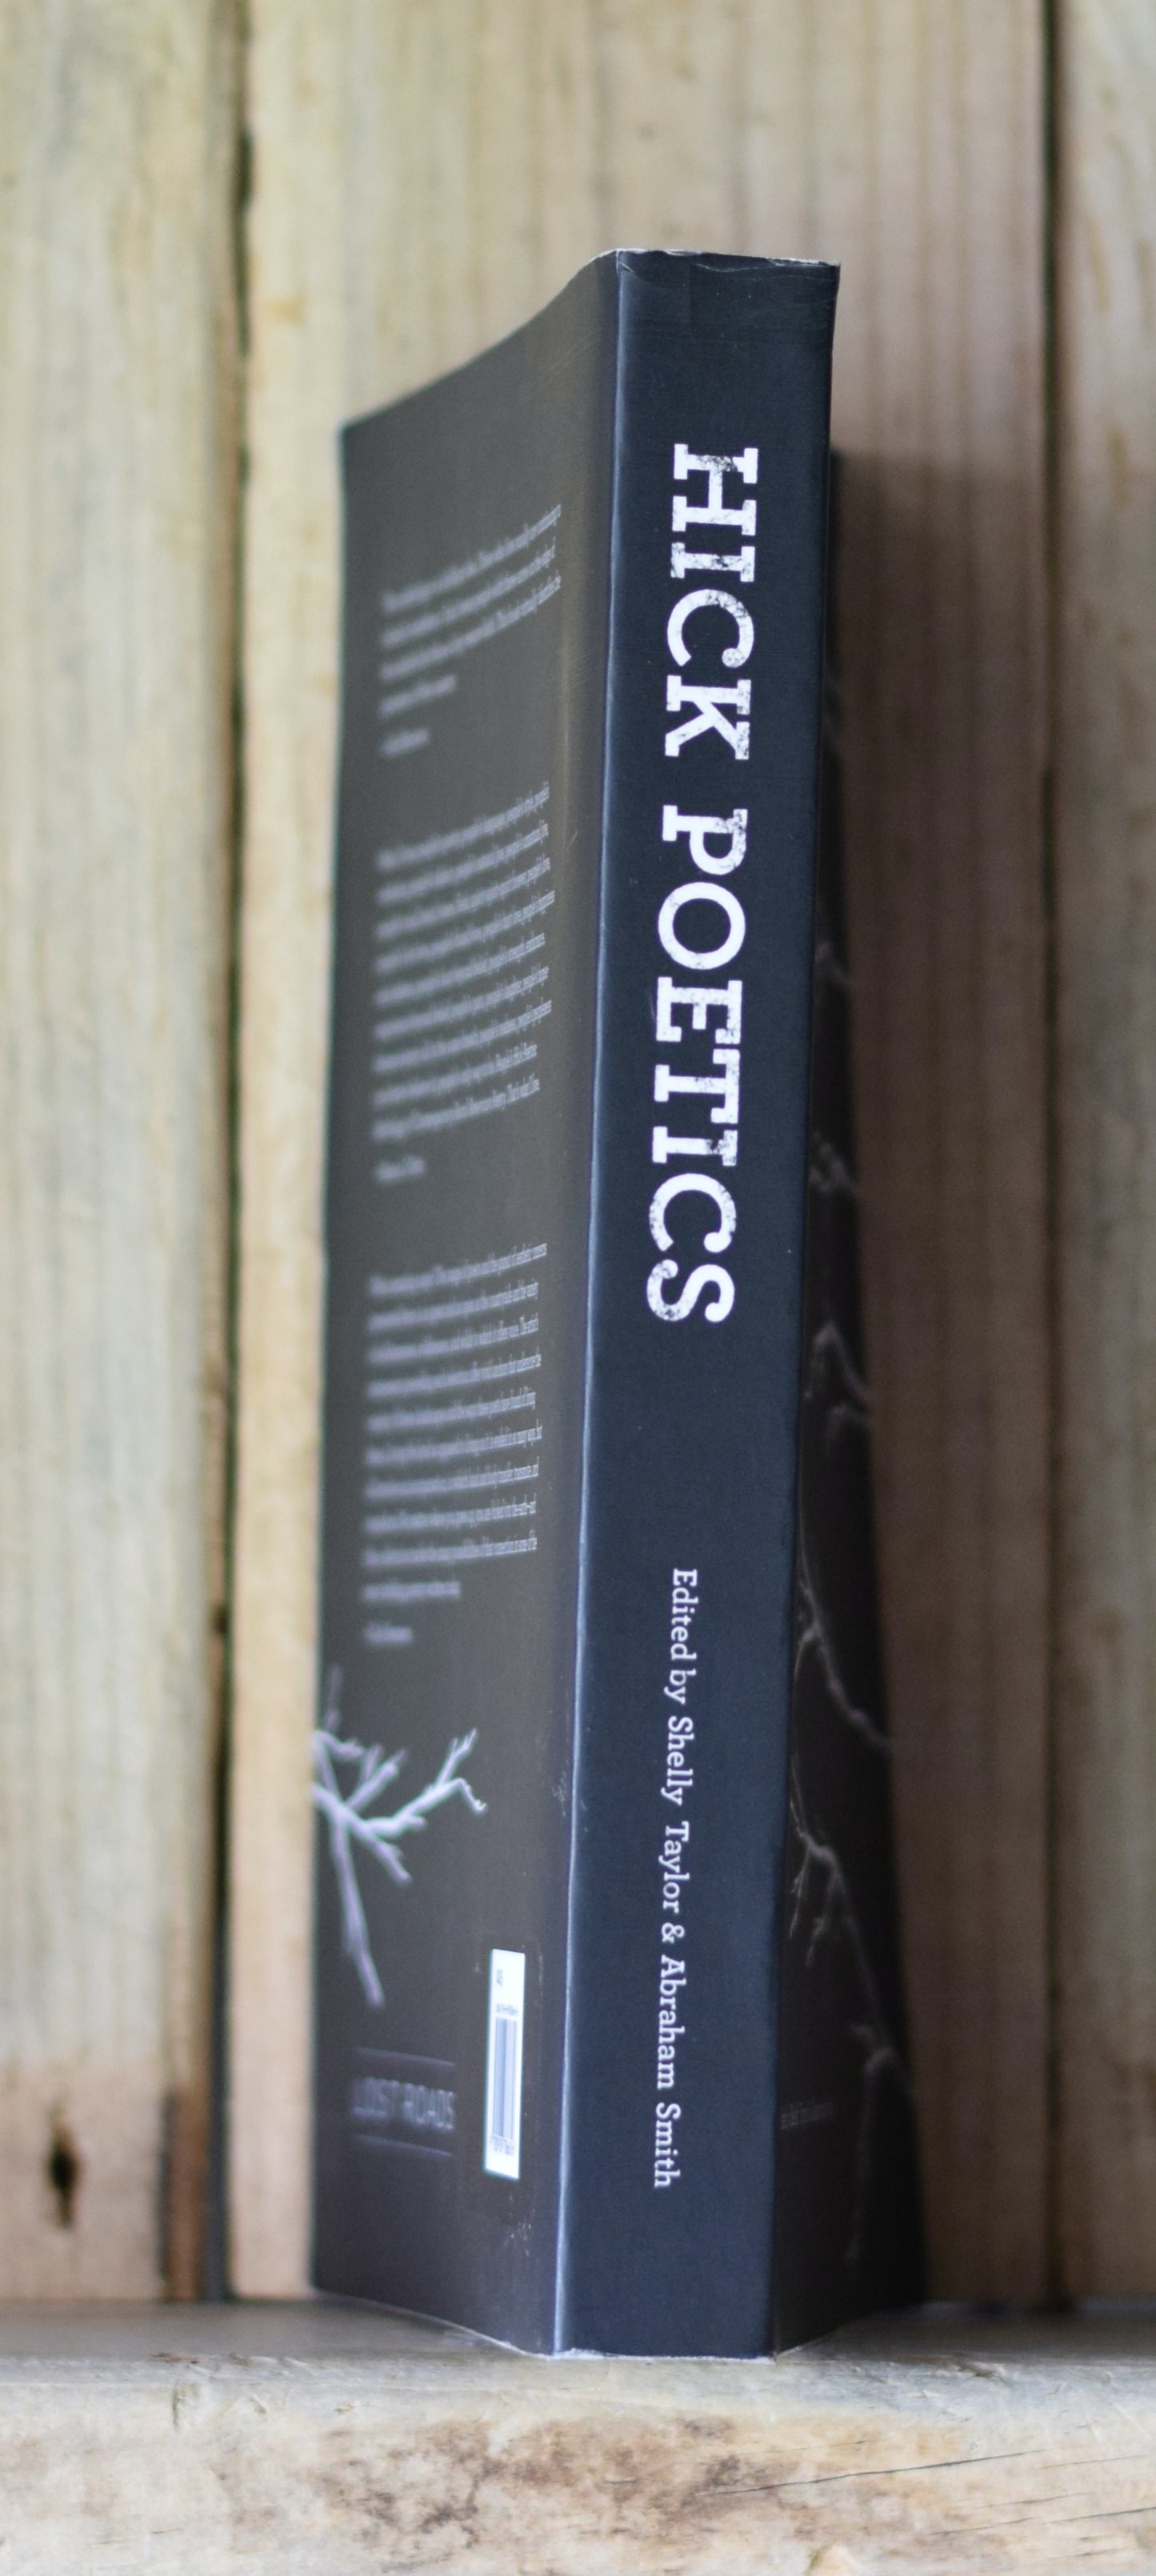 Poetry Paperback: Hick Poetics, Edited by Shelly Taylor & Abraham Smith